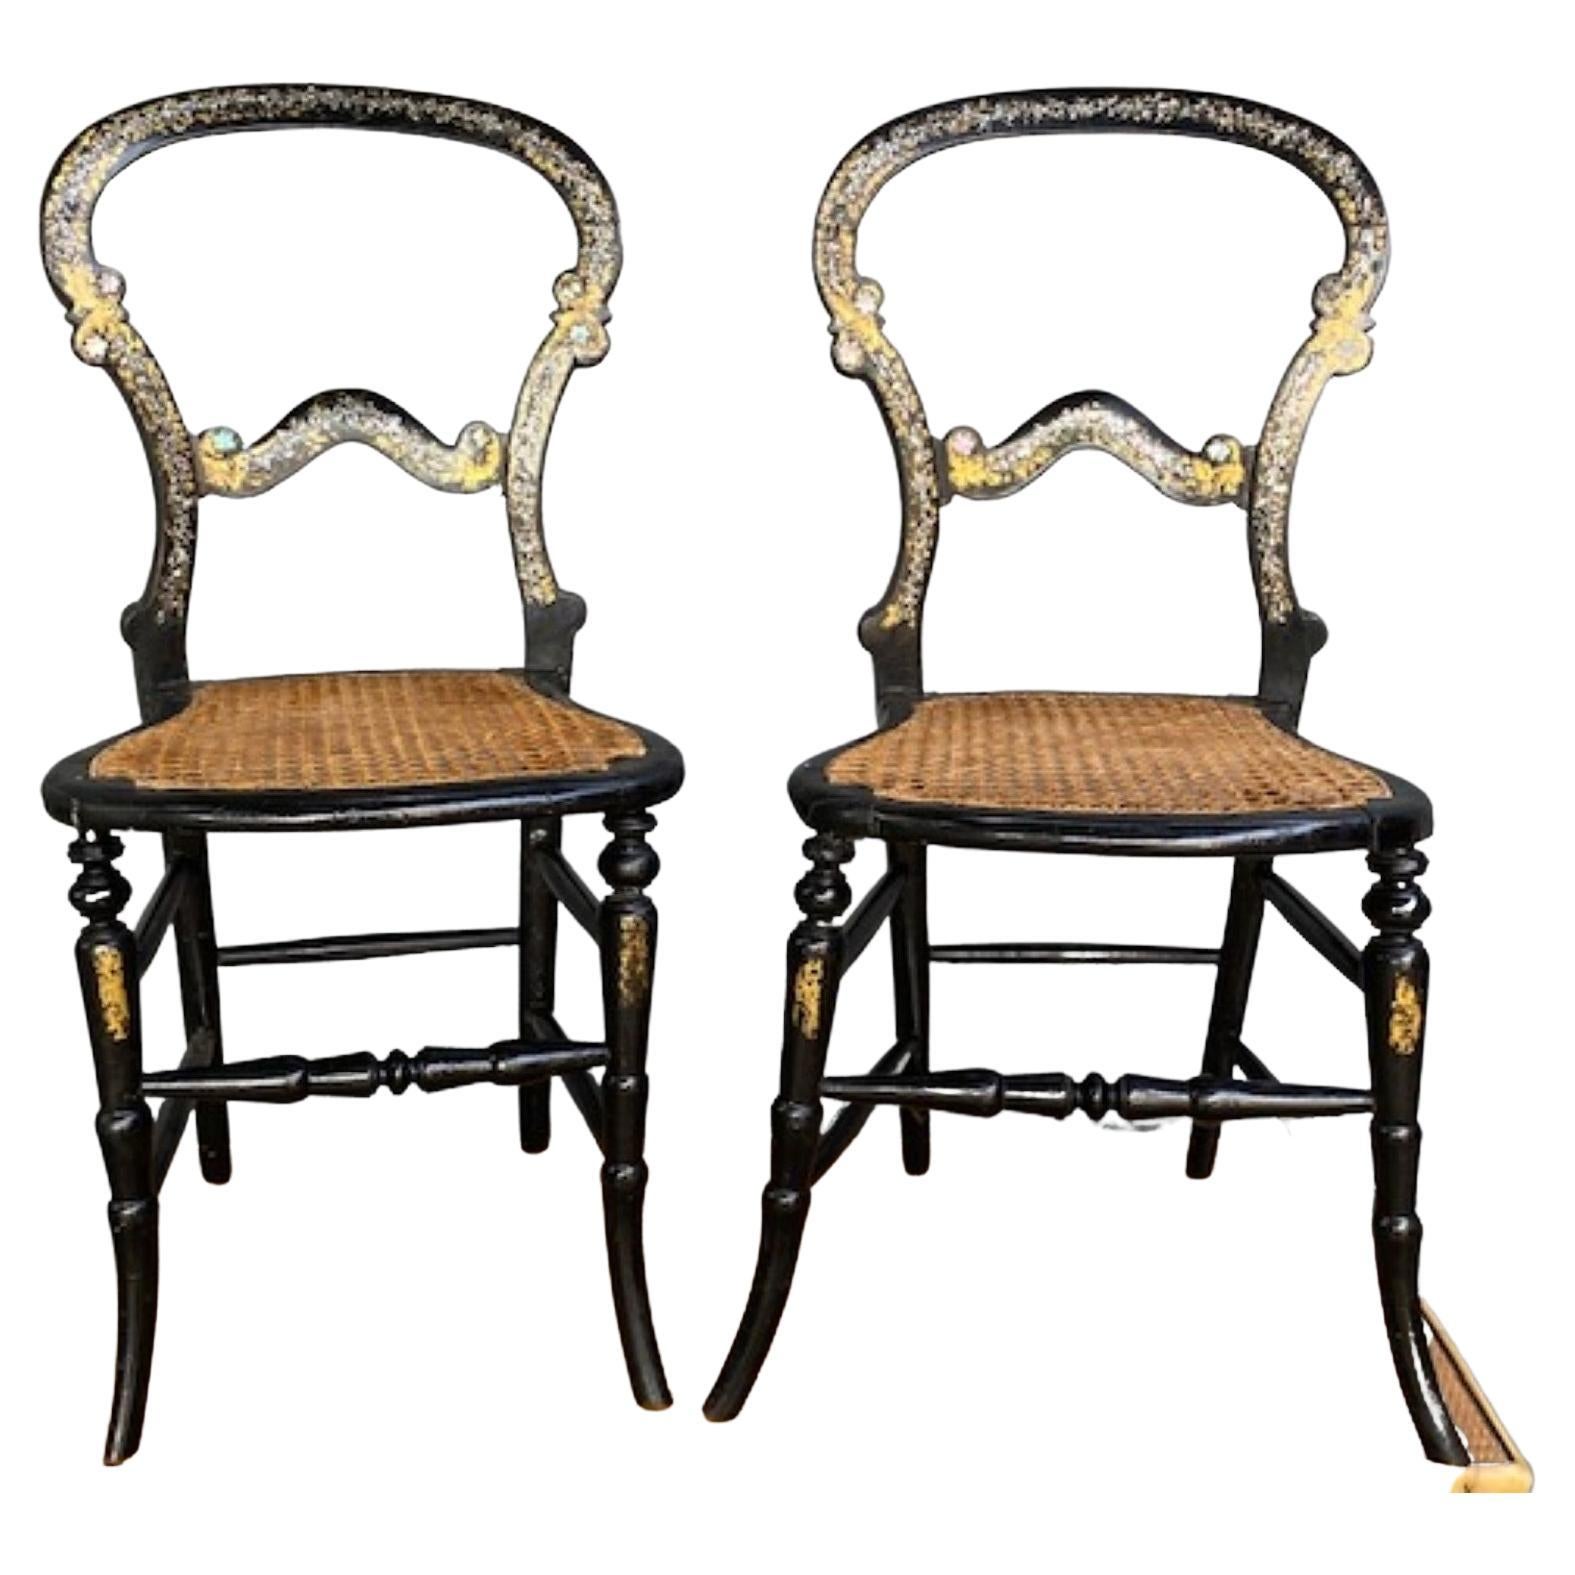 Pair of 19th Century. Antique English Ebonised Victorian Side Chairs

A beautiful pair of Victorian bergere.  Ebonised, mother of pearl; and gilt work, decorative show side chairs.  Rarely to be found in pairs. This pair has lovely mother-of-pearl